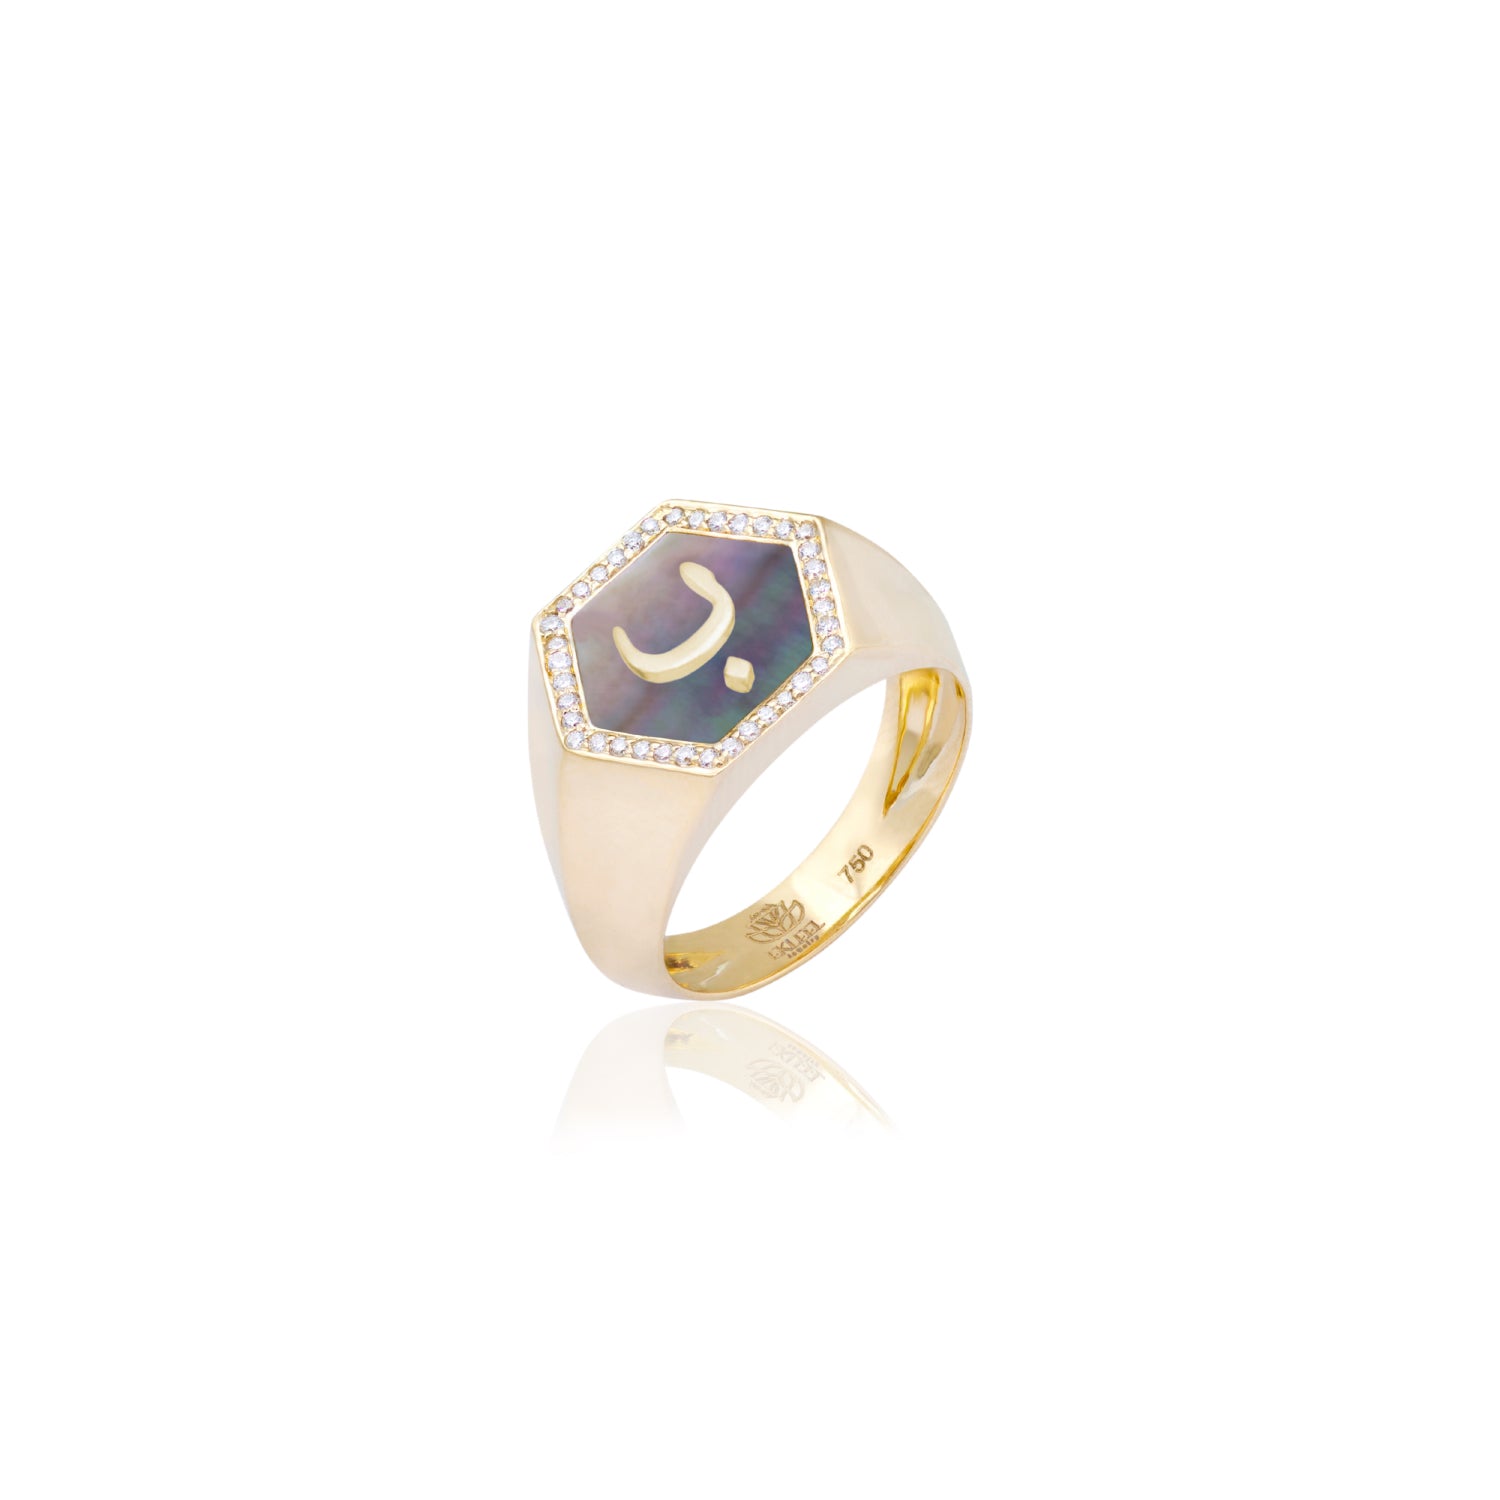 Qamoos 2.0 Letter ب Black Mother of Pearl and Diamond Signet Ring in Yellow Gold